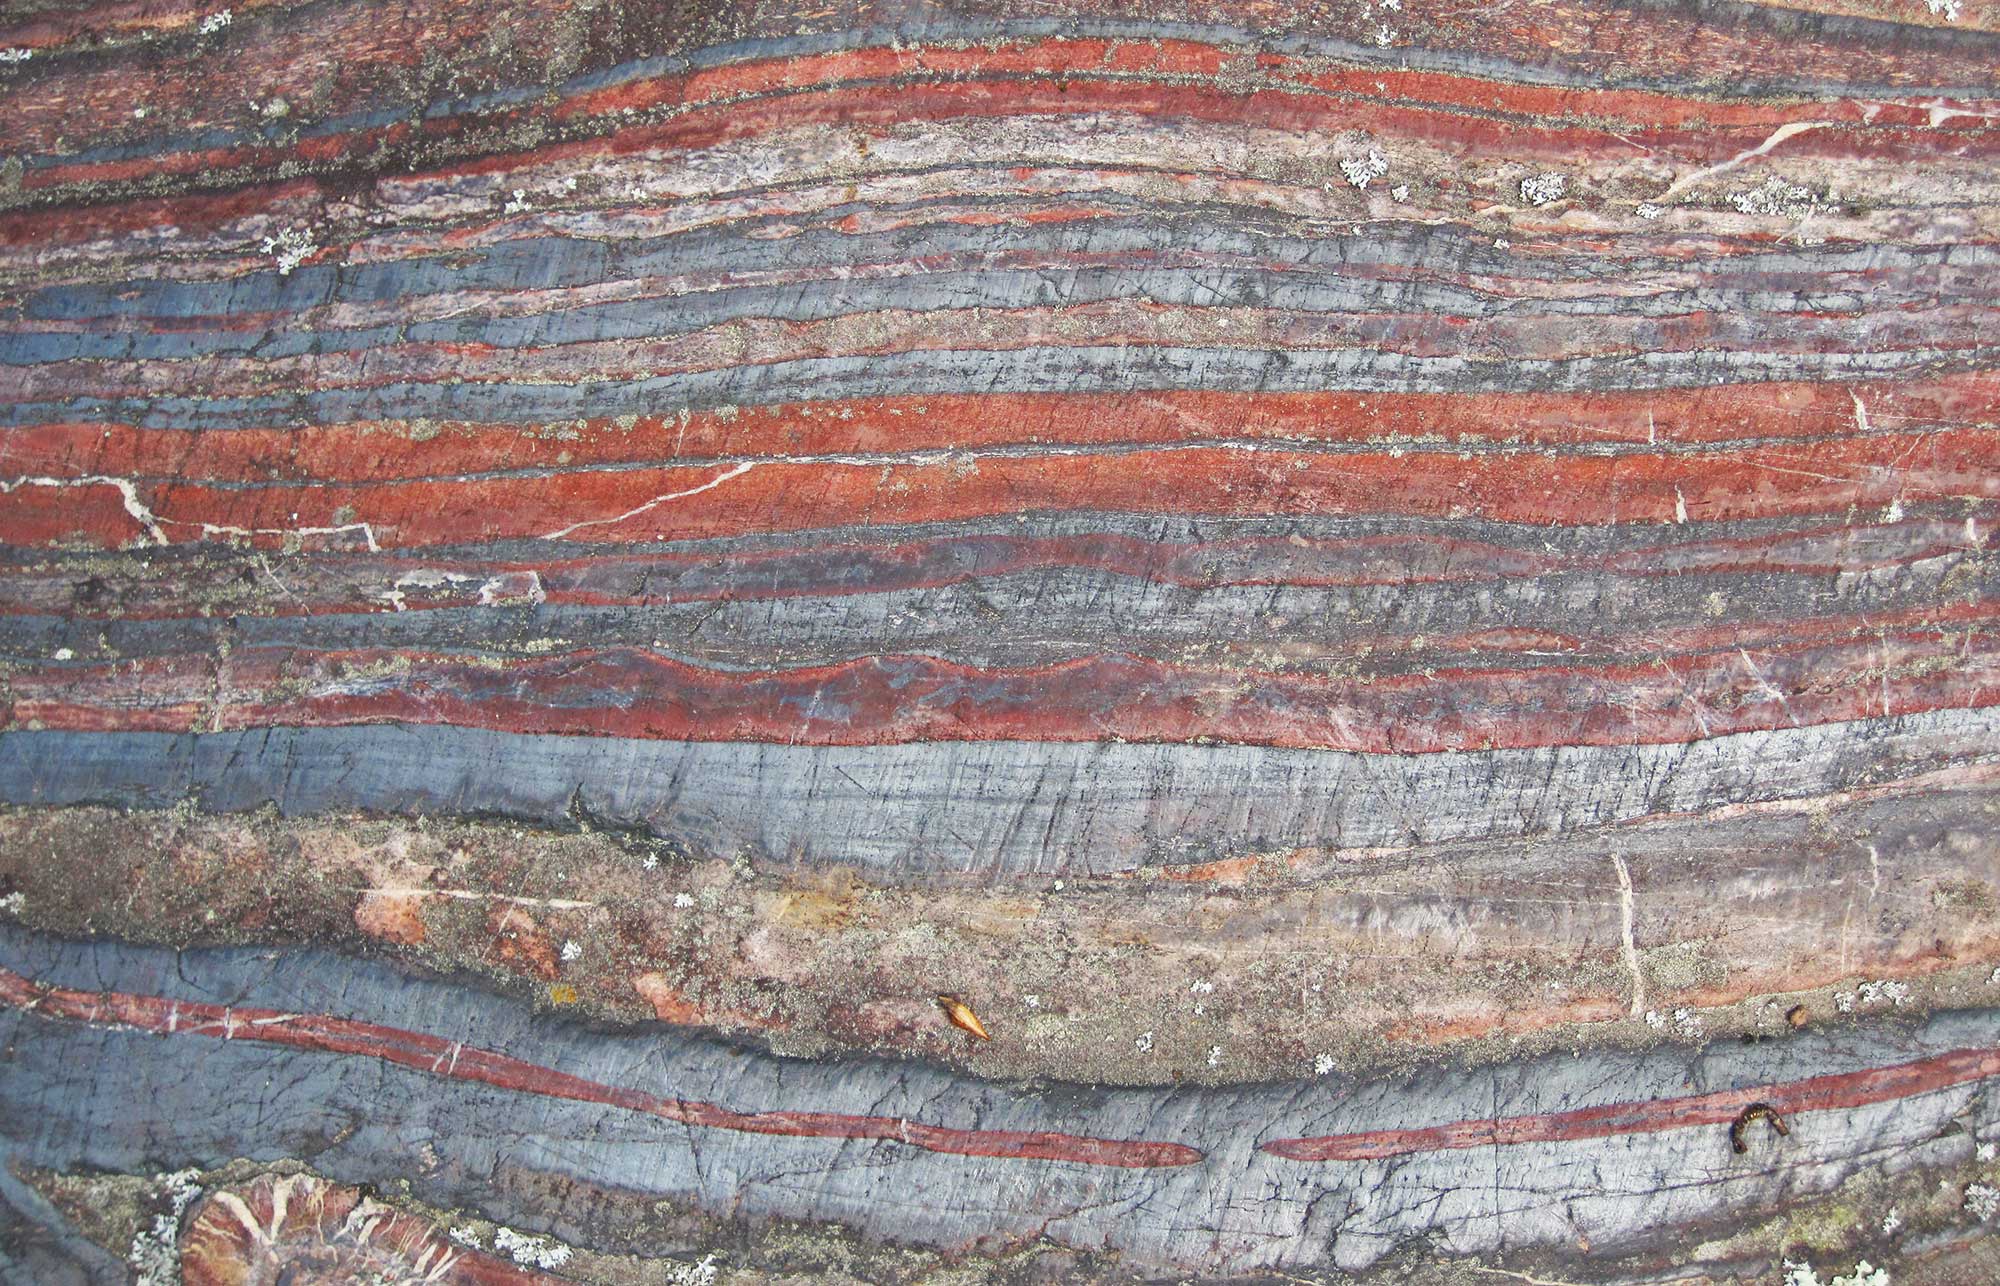 Photograph of a banded iron formation from the Archean of Minnesota.